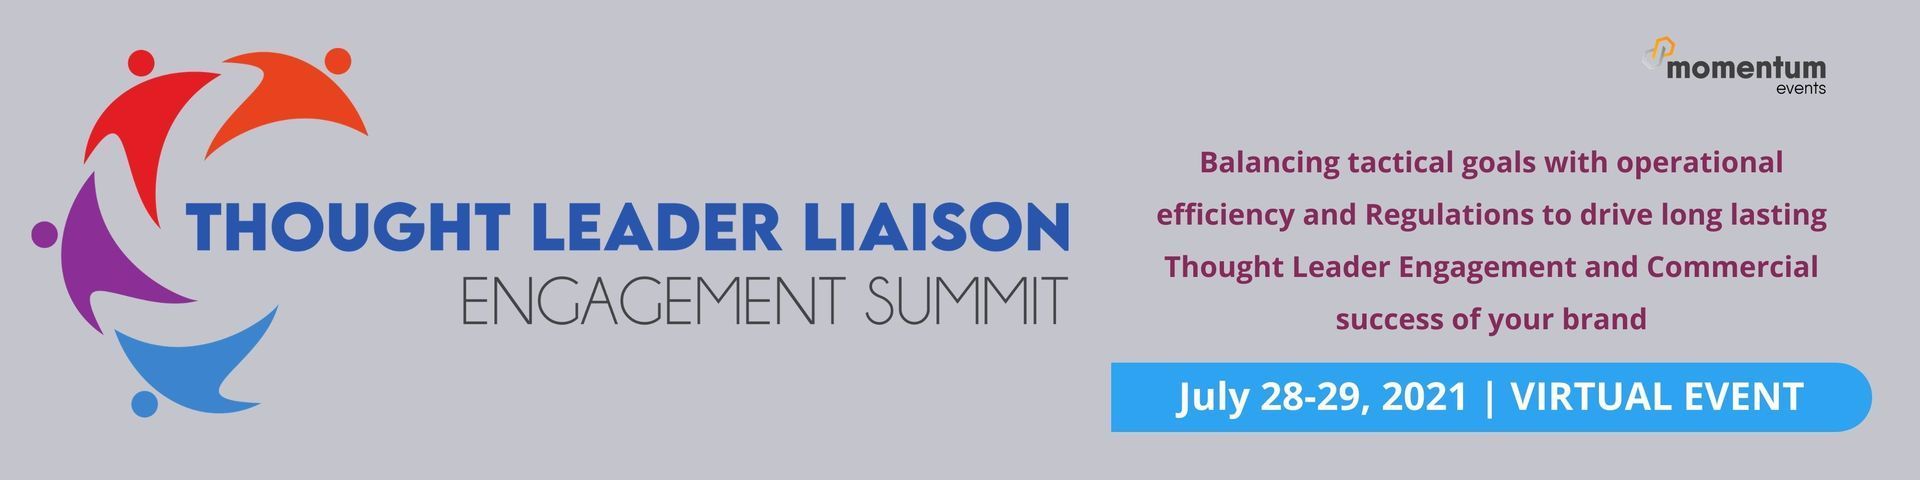 Thought Leader Liaison Engagement Summit, Online, United States